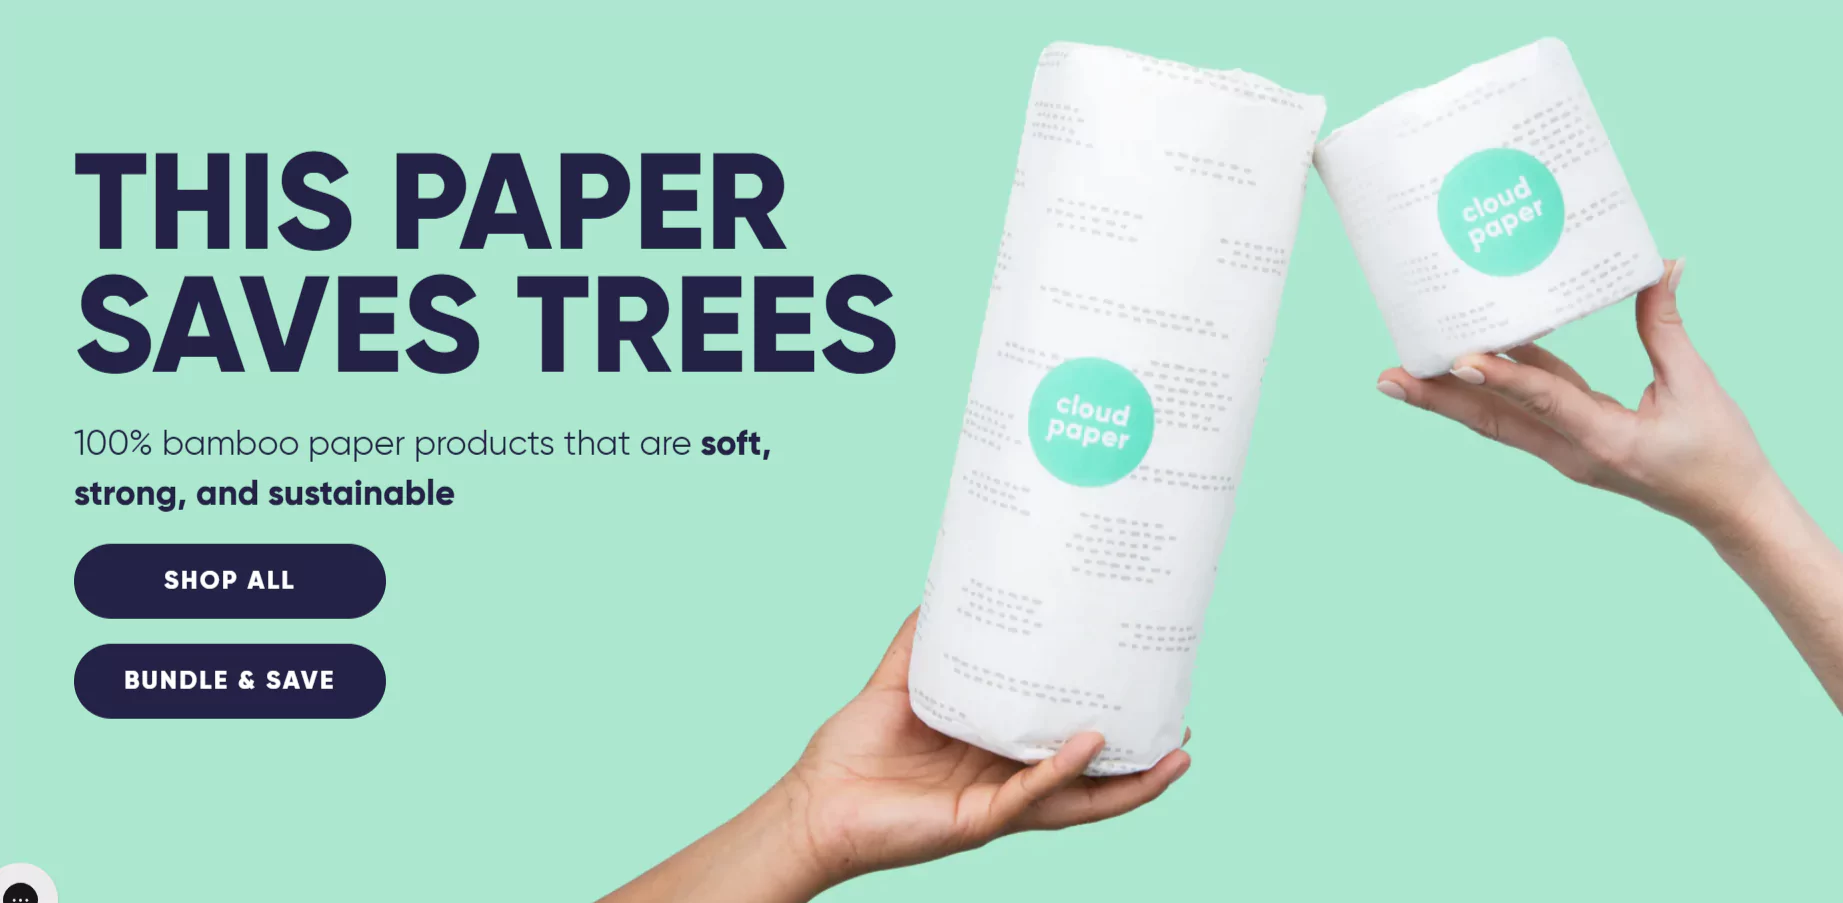 Cloud Paper - Bamboo Toilet Paper Made In USA